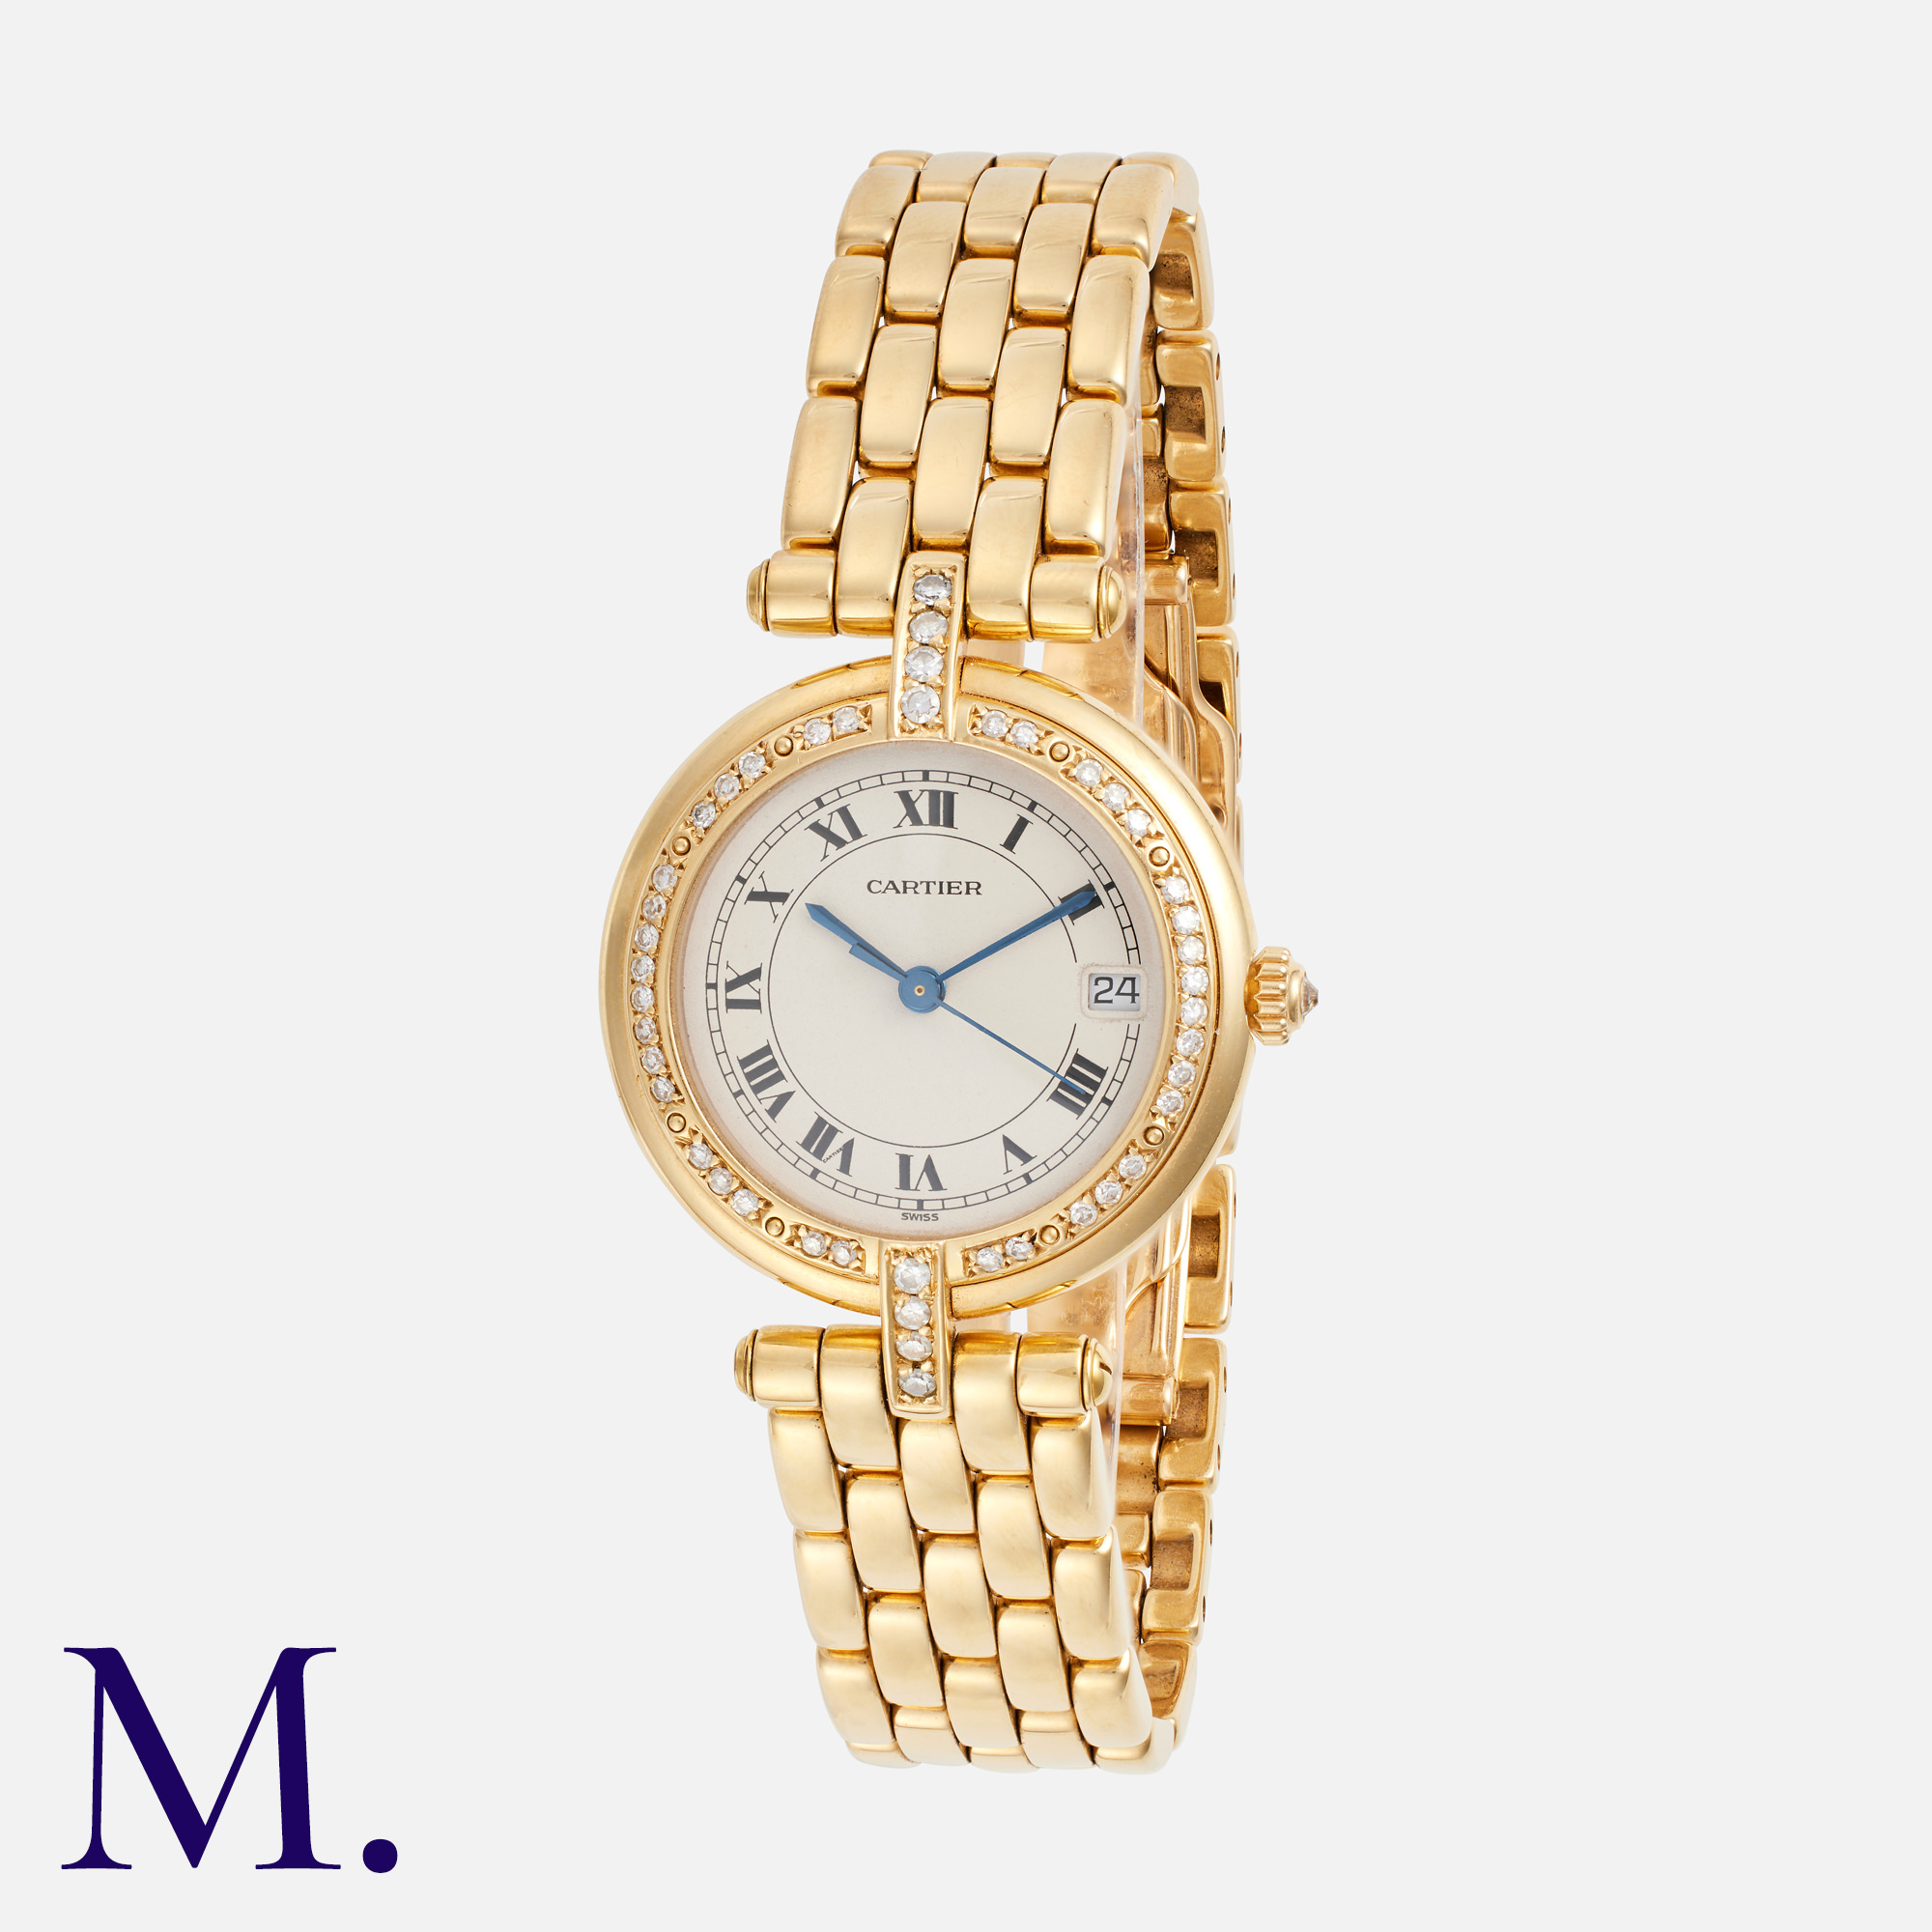 CARTIER. A Ladies Cartier Vendome Ronde Wristwatch in 18ct yellow gold, the circular cream dial with